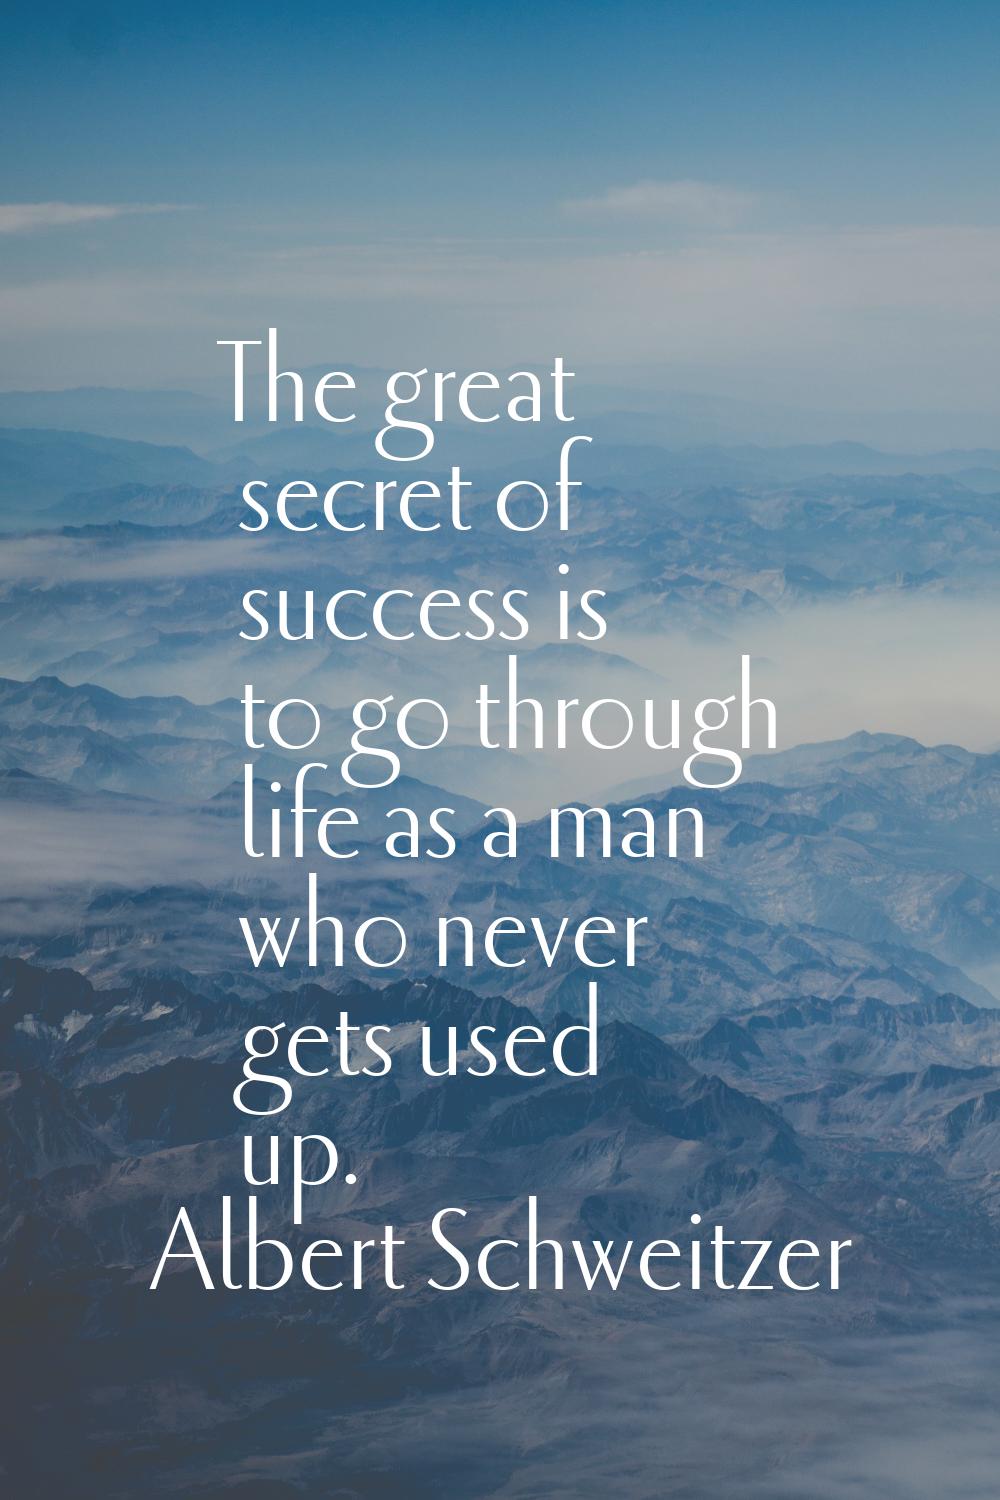 The great secret of success is to go through life as a man who never gets used up.